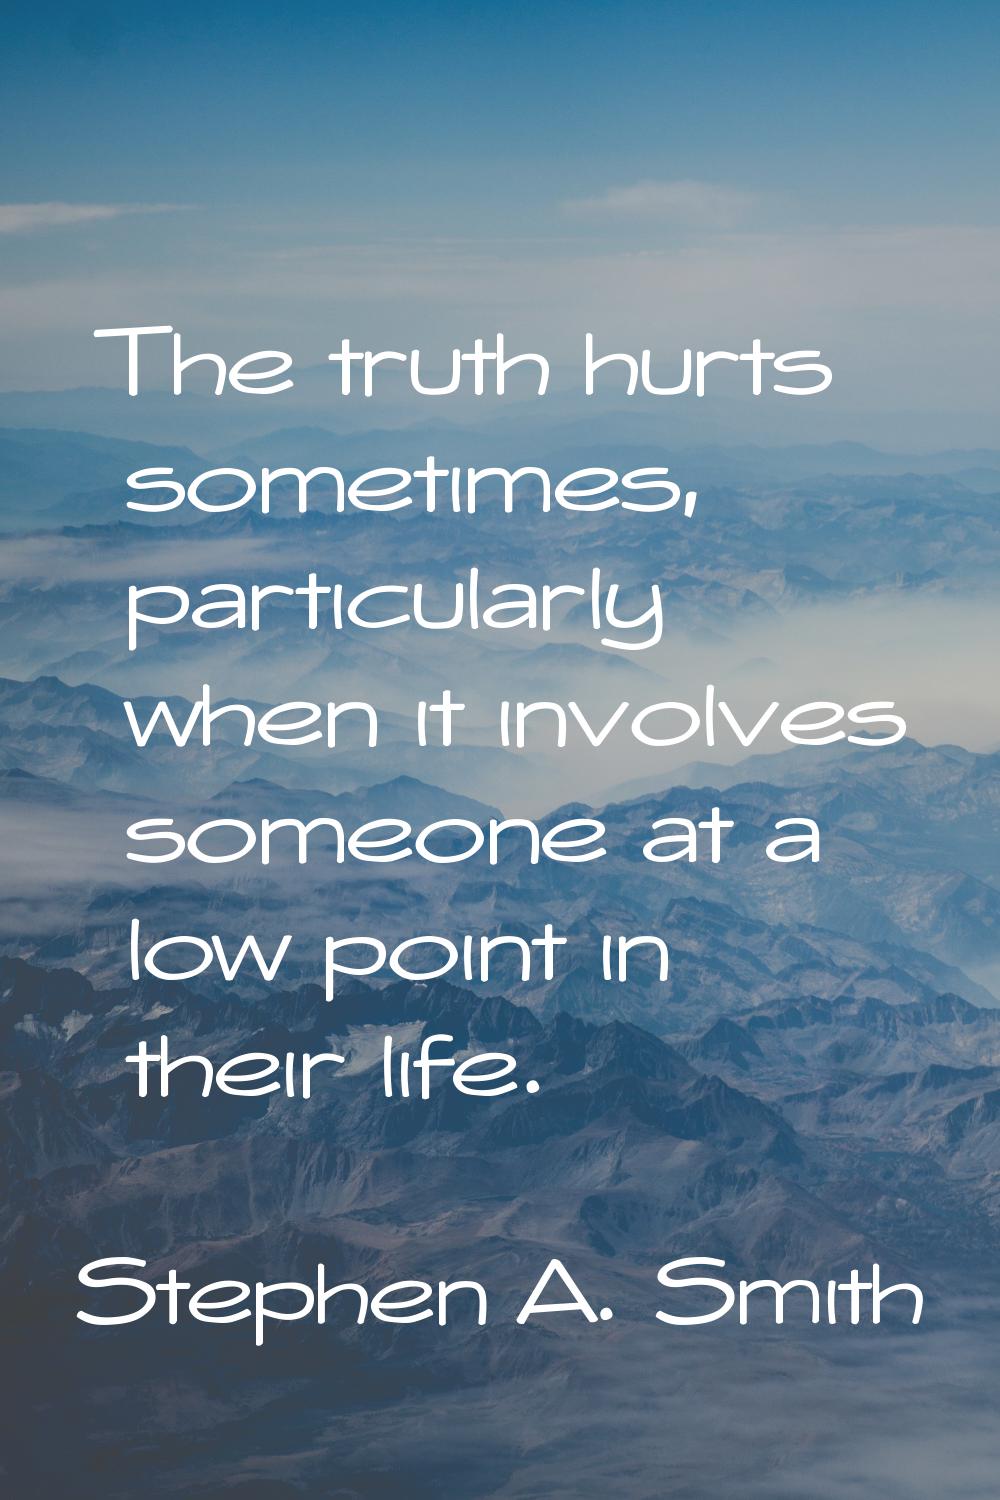 The truth hurts sometimes, particularly when it involves someone at a low point in their life.